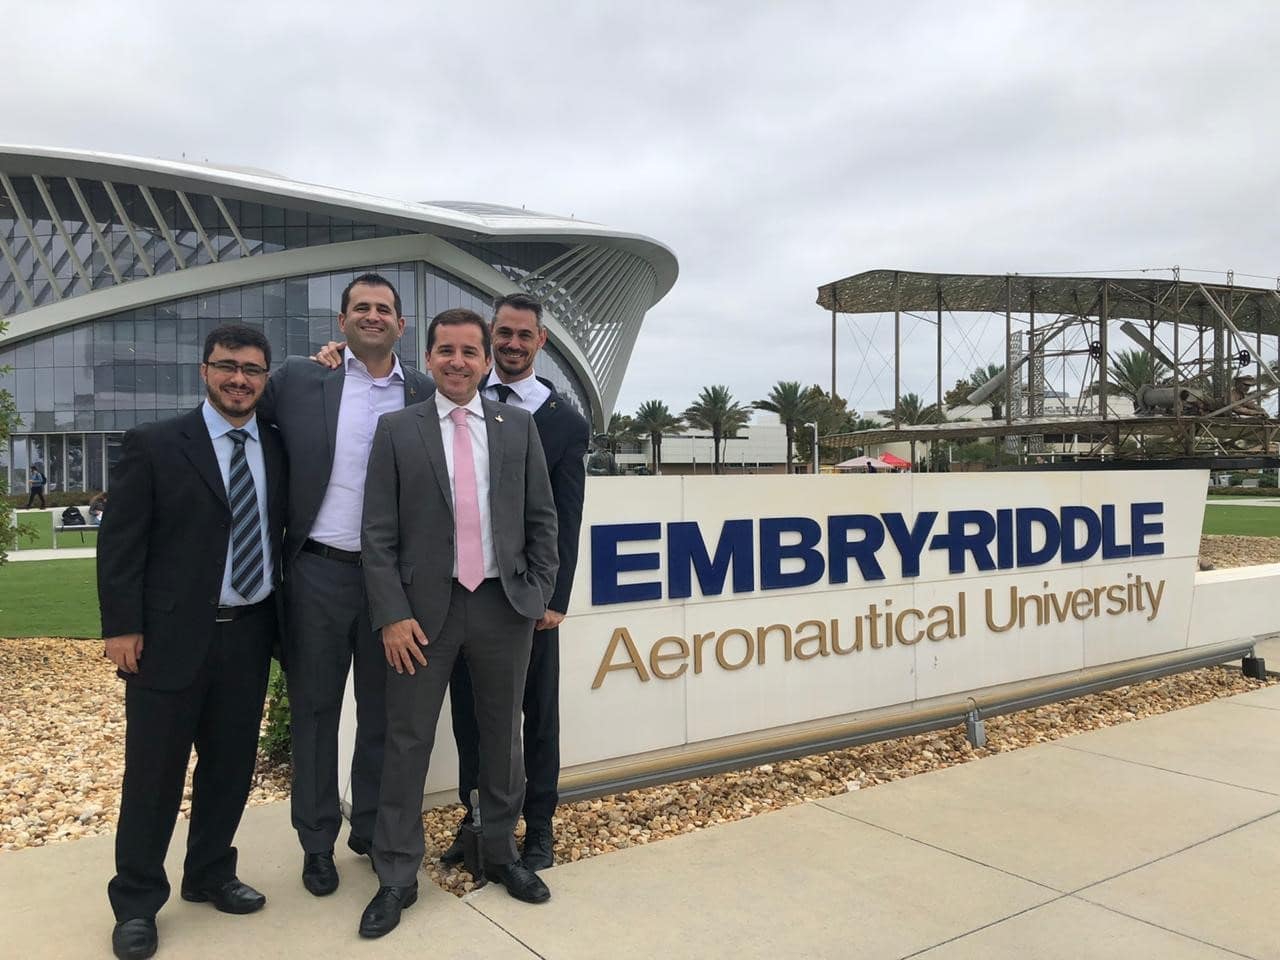 Fabiano Gomes de Oliveira, Diogo Youssef, Luciano Figueiredo Vale de Oliveira, and João Centeno stand next to the Embry-Riddle sign on Daytona Beach’s campus.